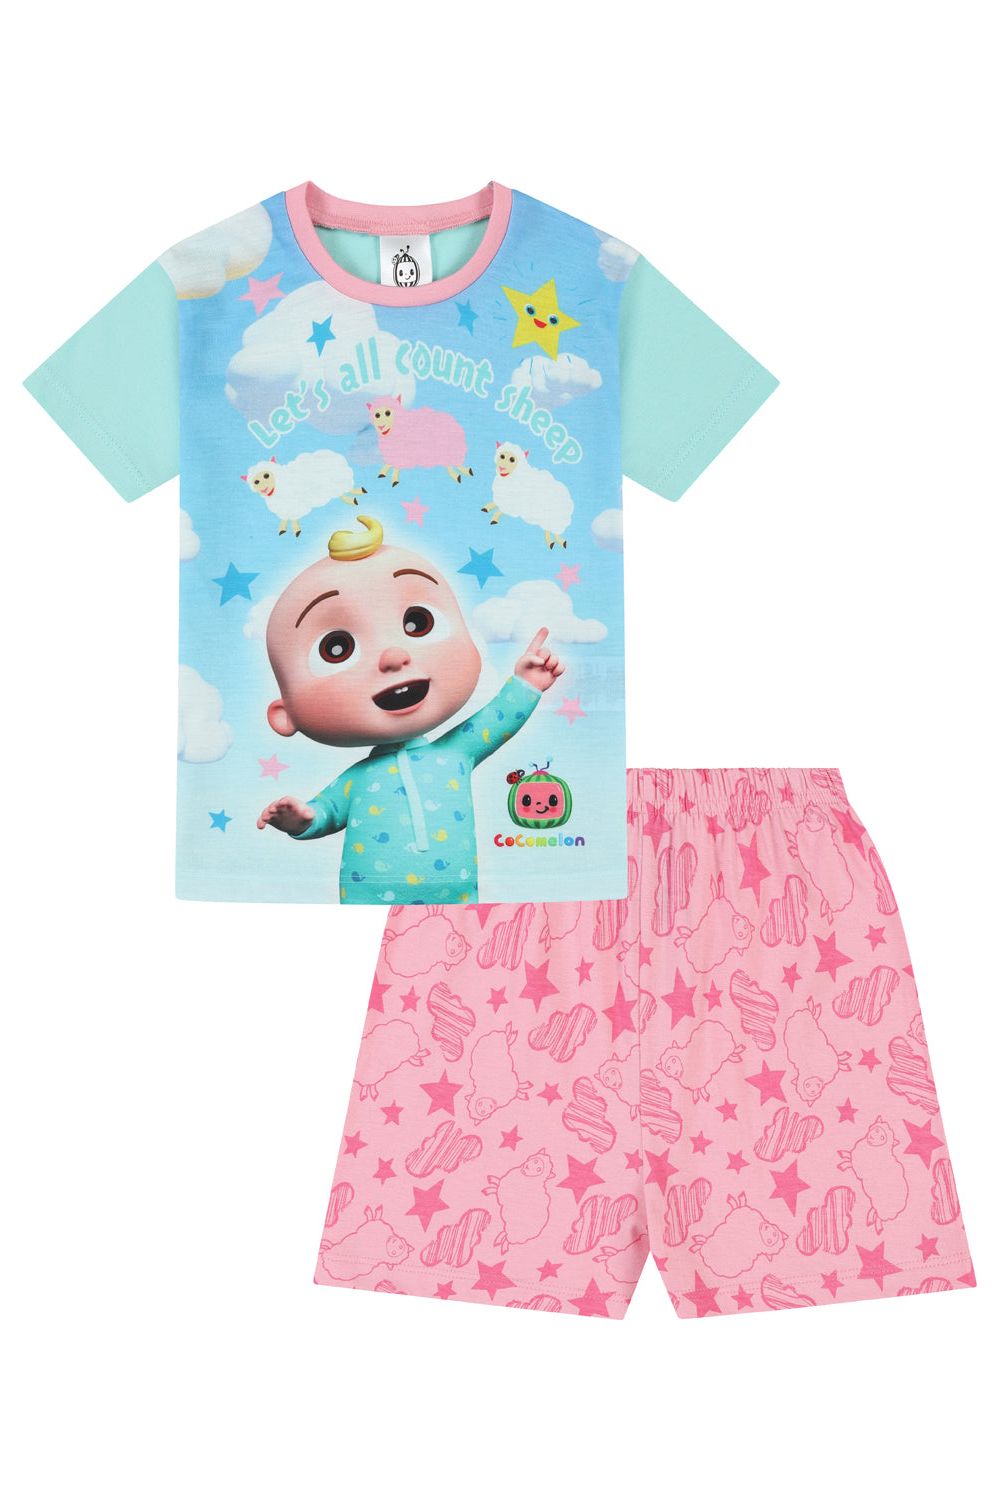 Girls Cocomelon Nursery Rhymes Let's All Count Sheep Short Pyjamas